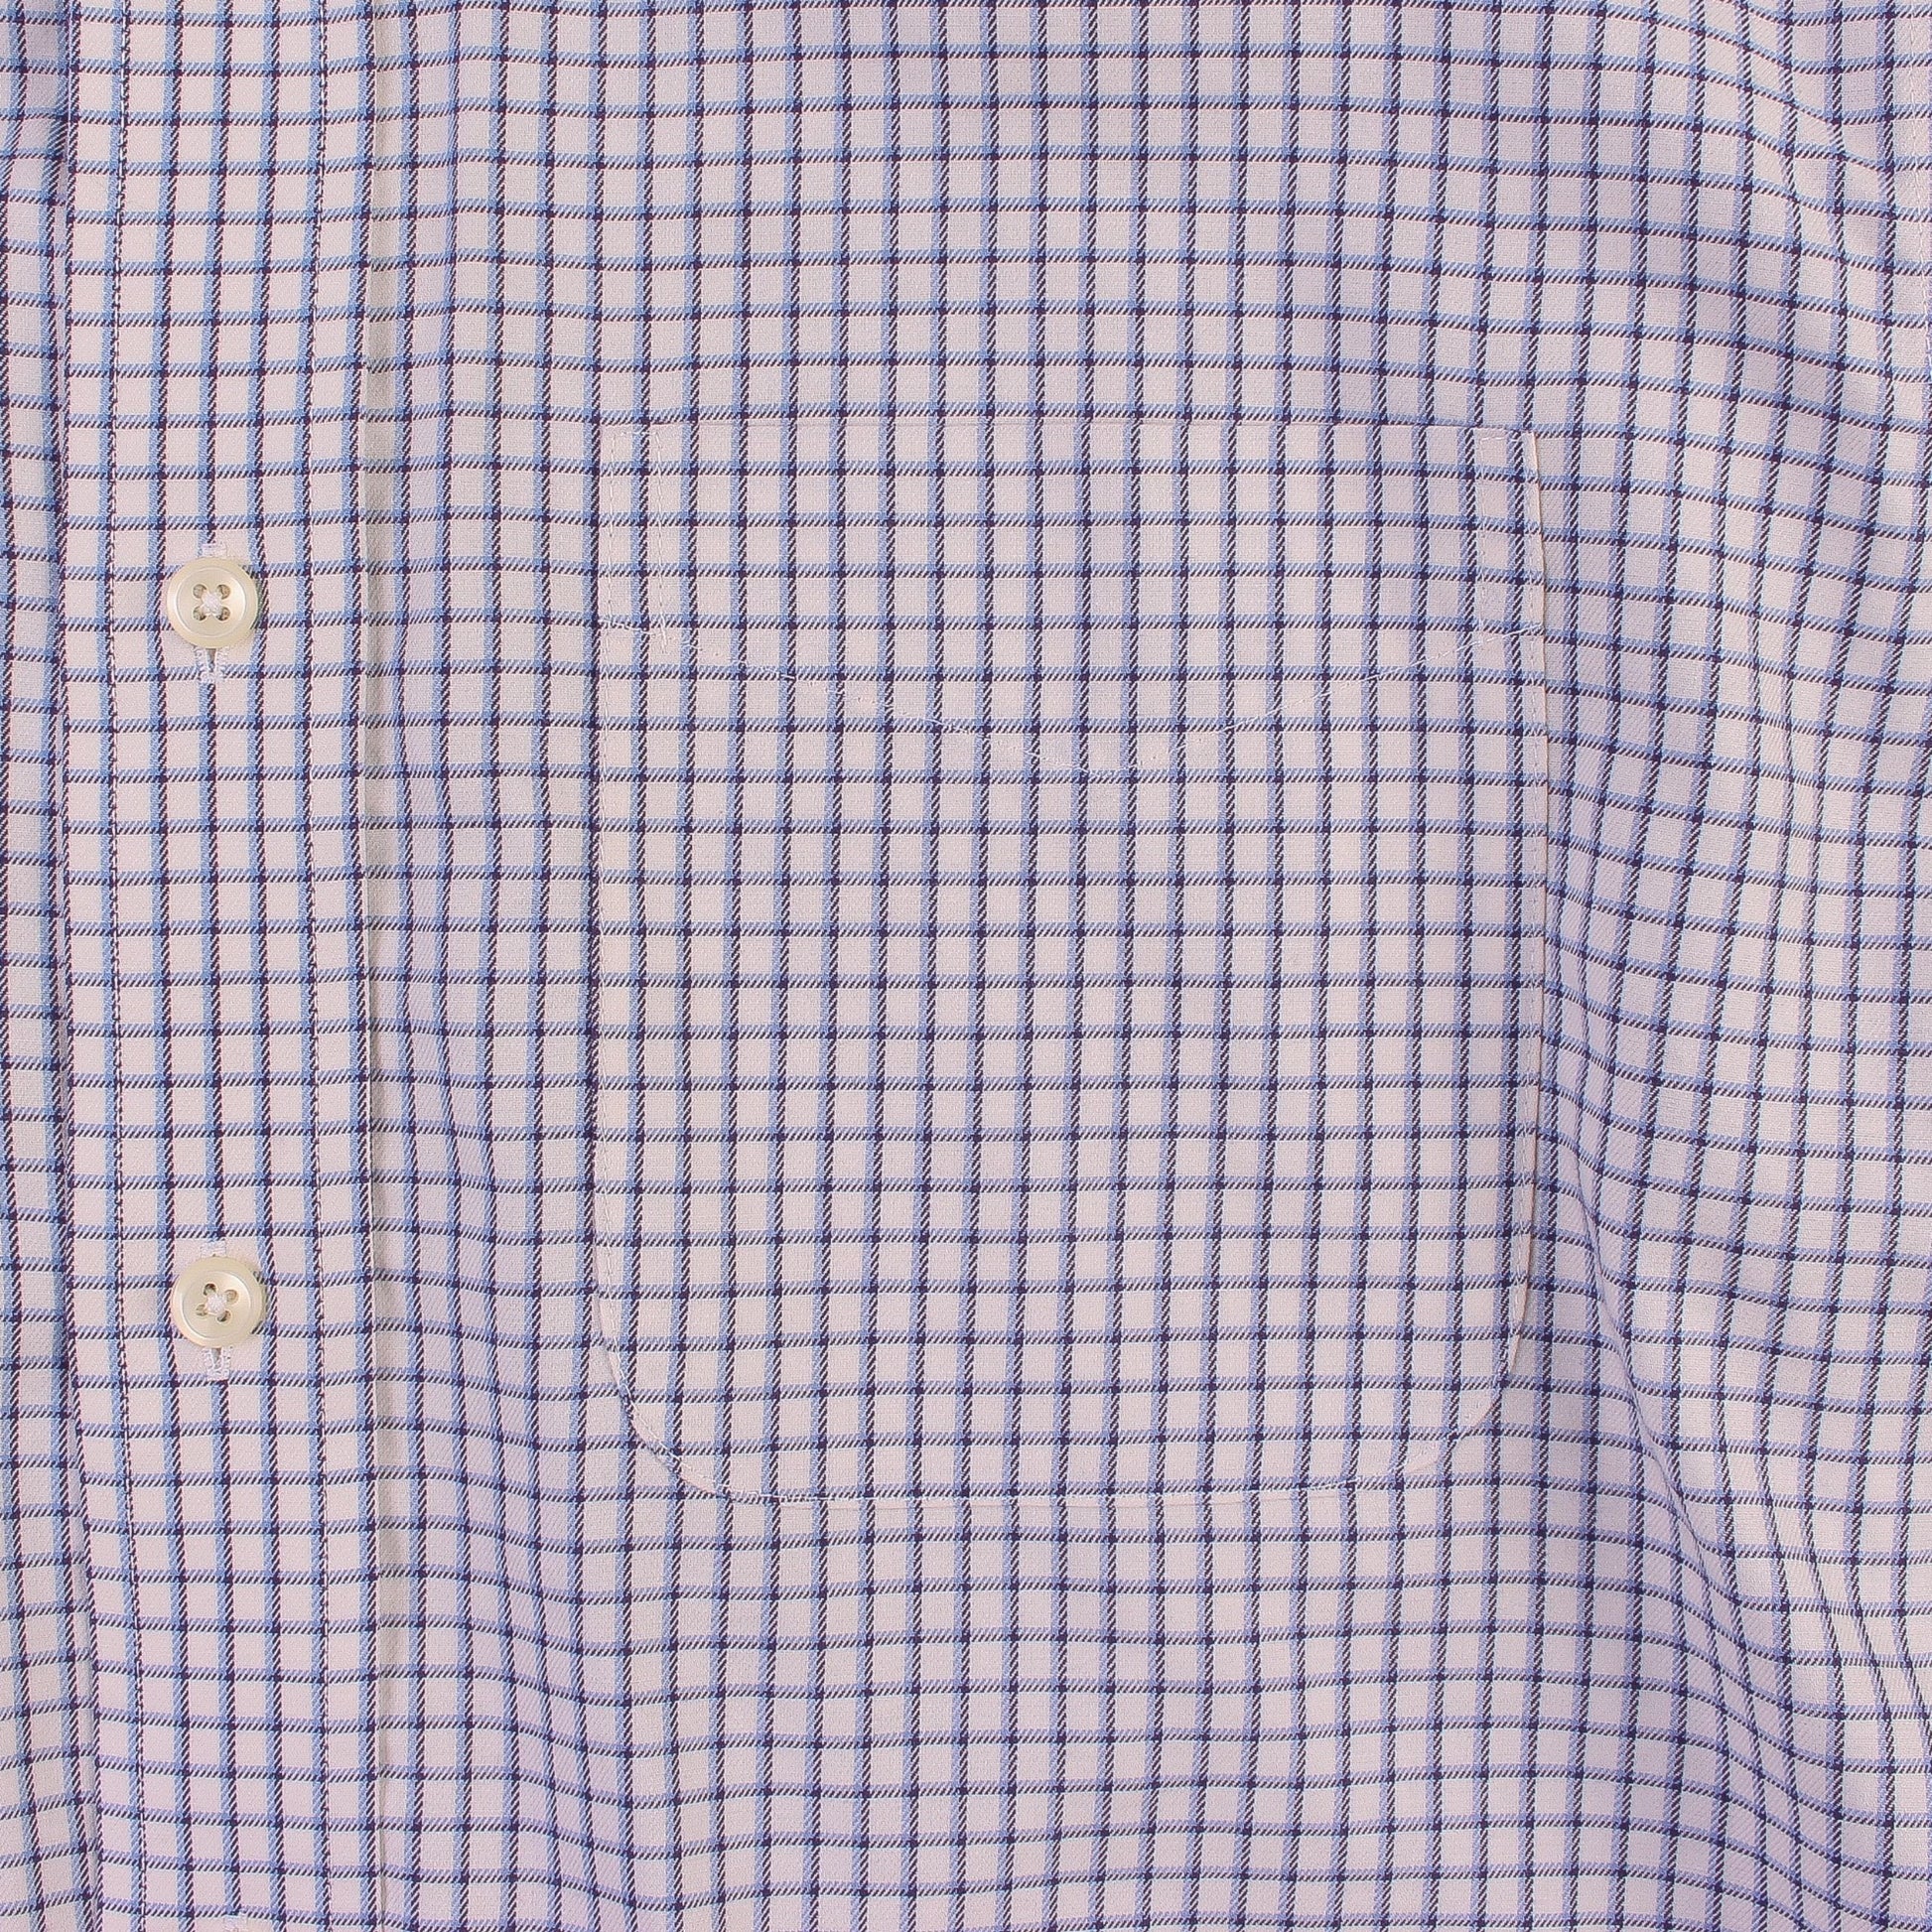 Vintage Shirt - Blue and White Check - American Madness